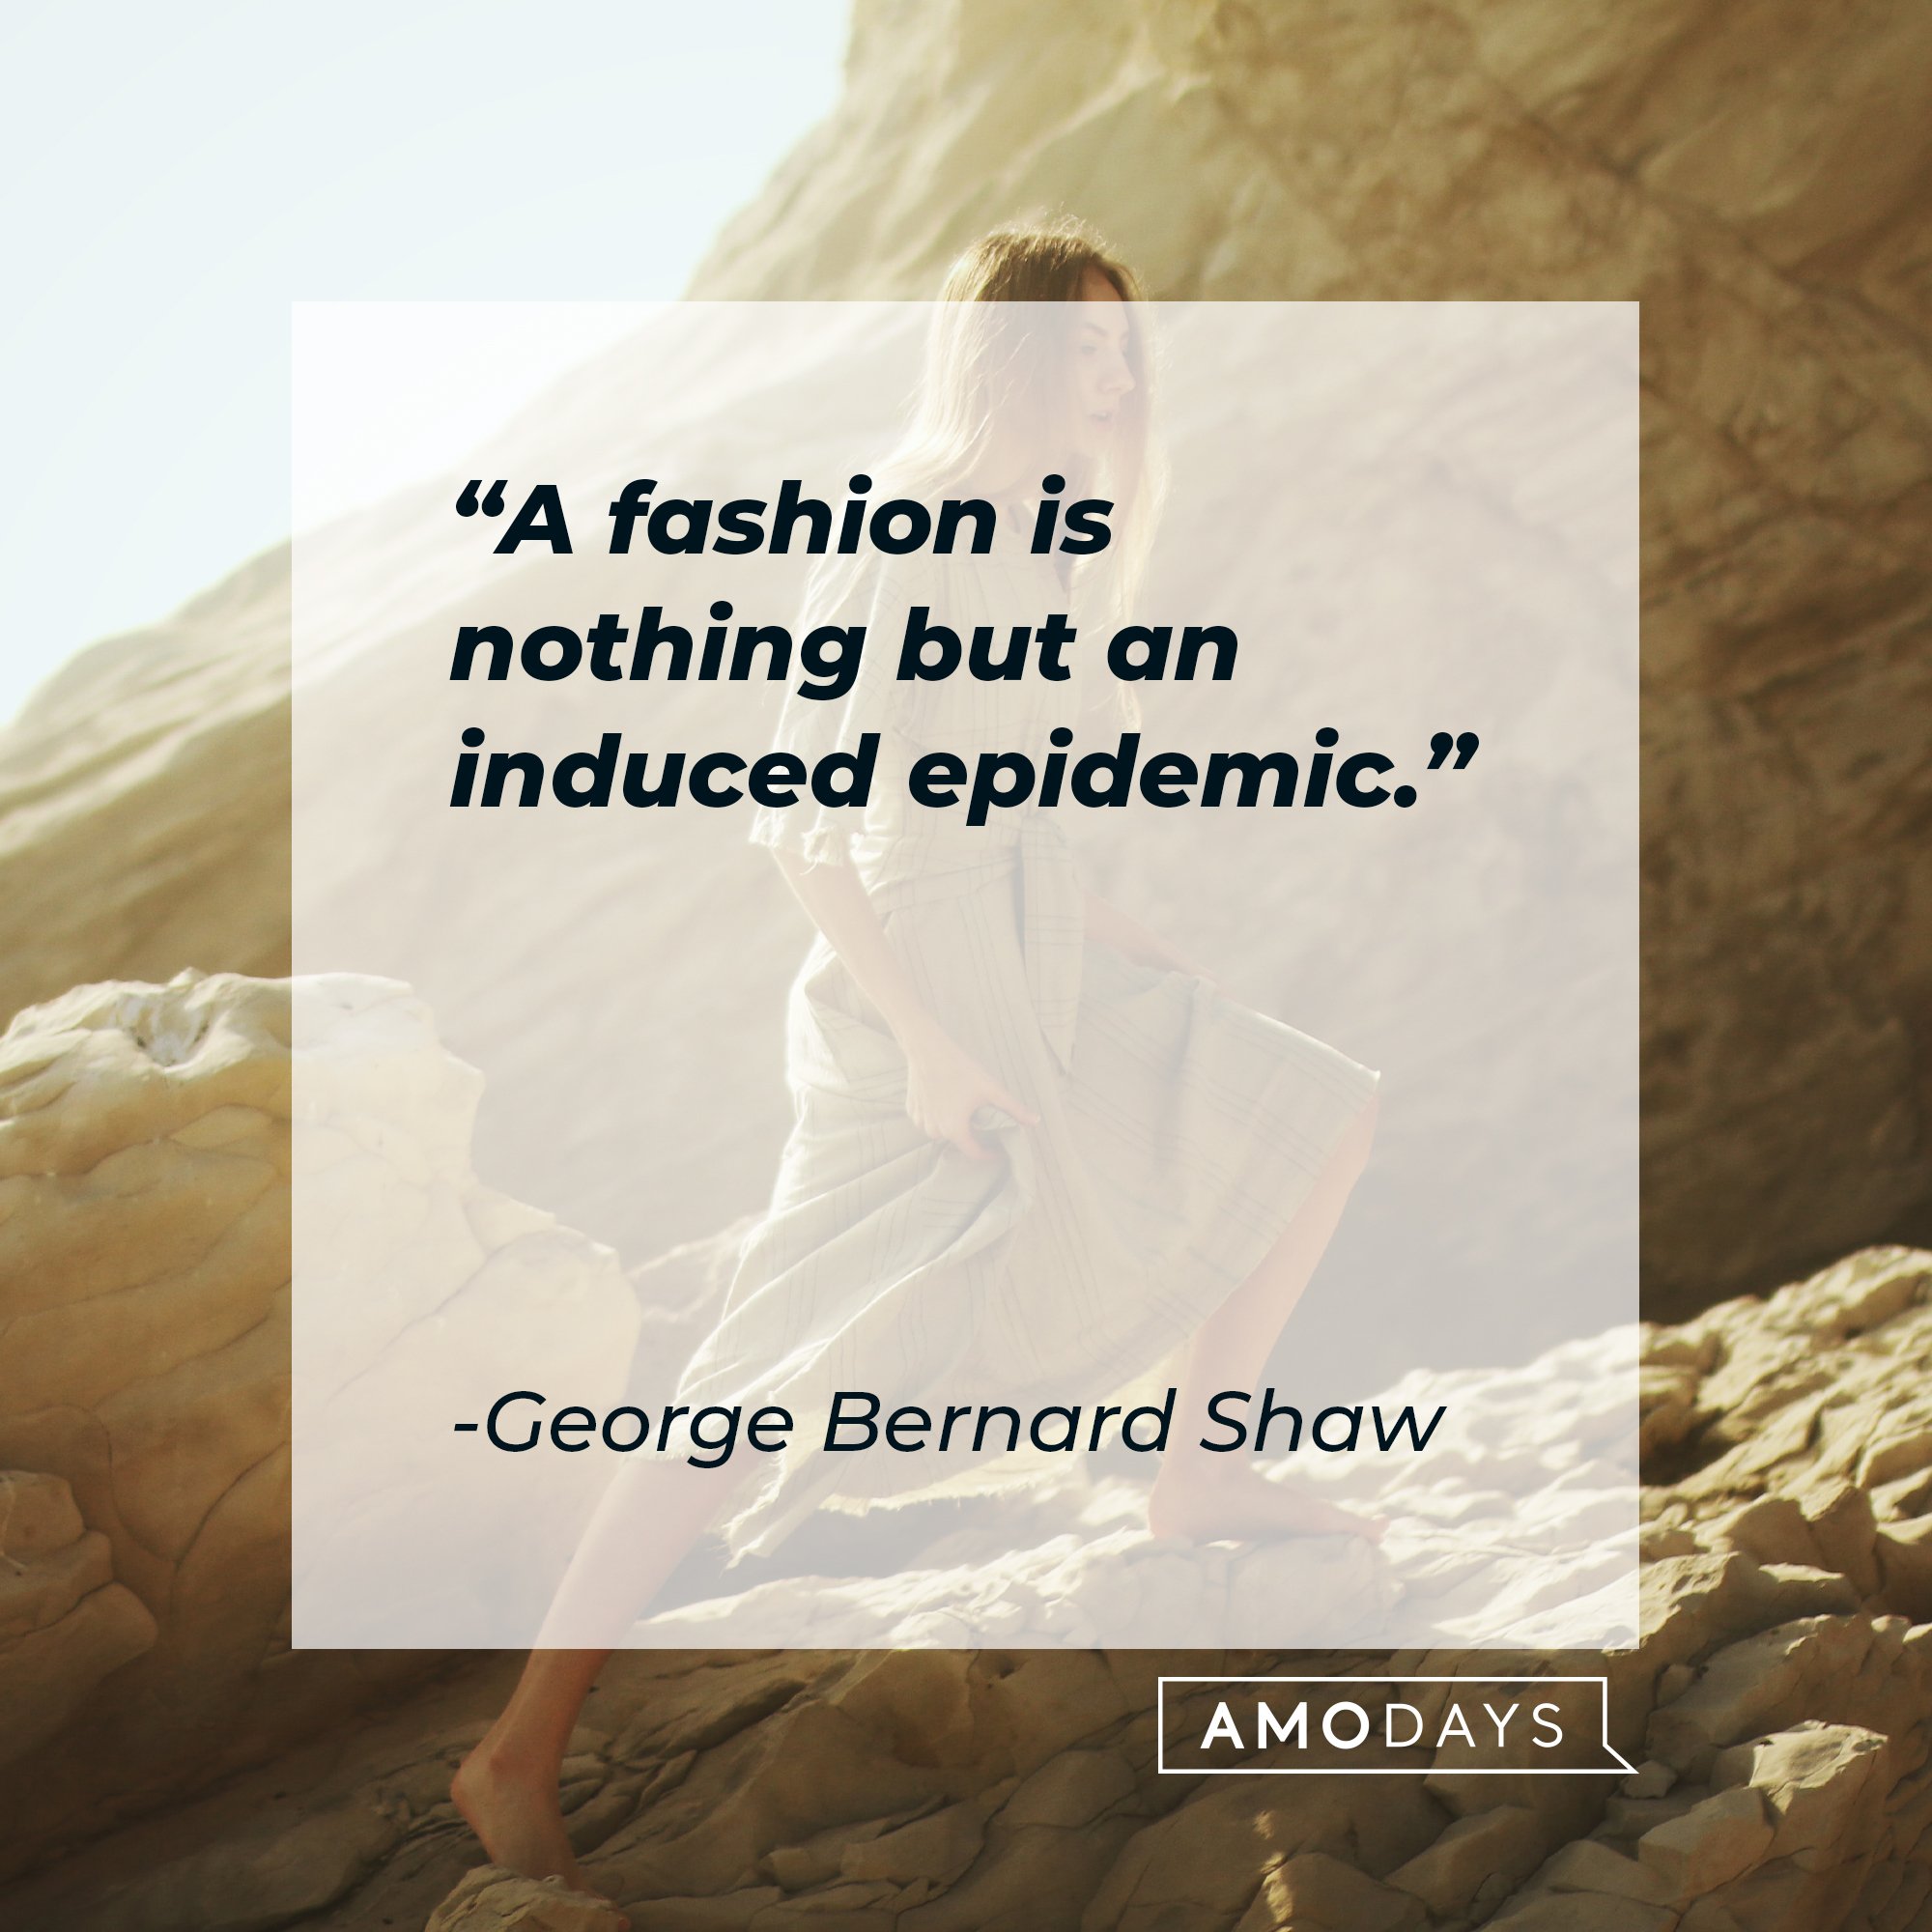 George Bernard Shaw’s quote: "A fashion is nothing but an induced epidemic." | Image: AmoDays